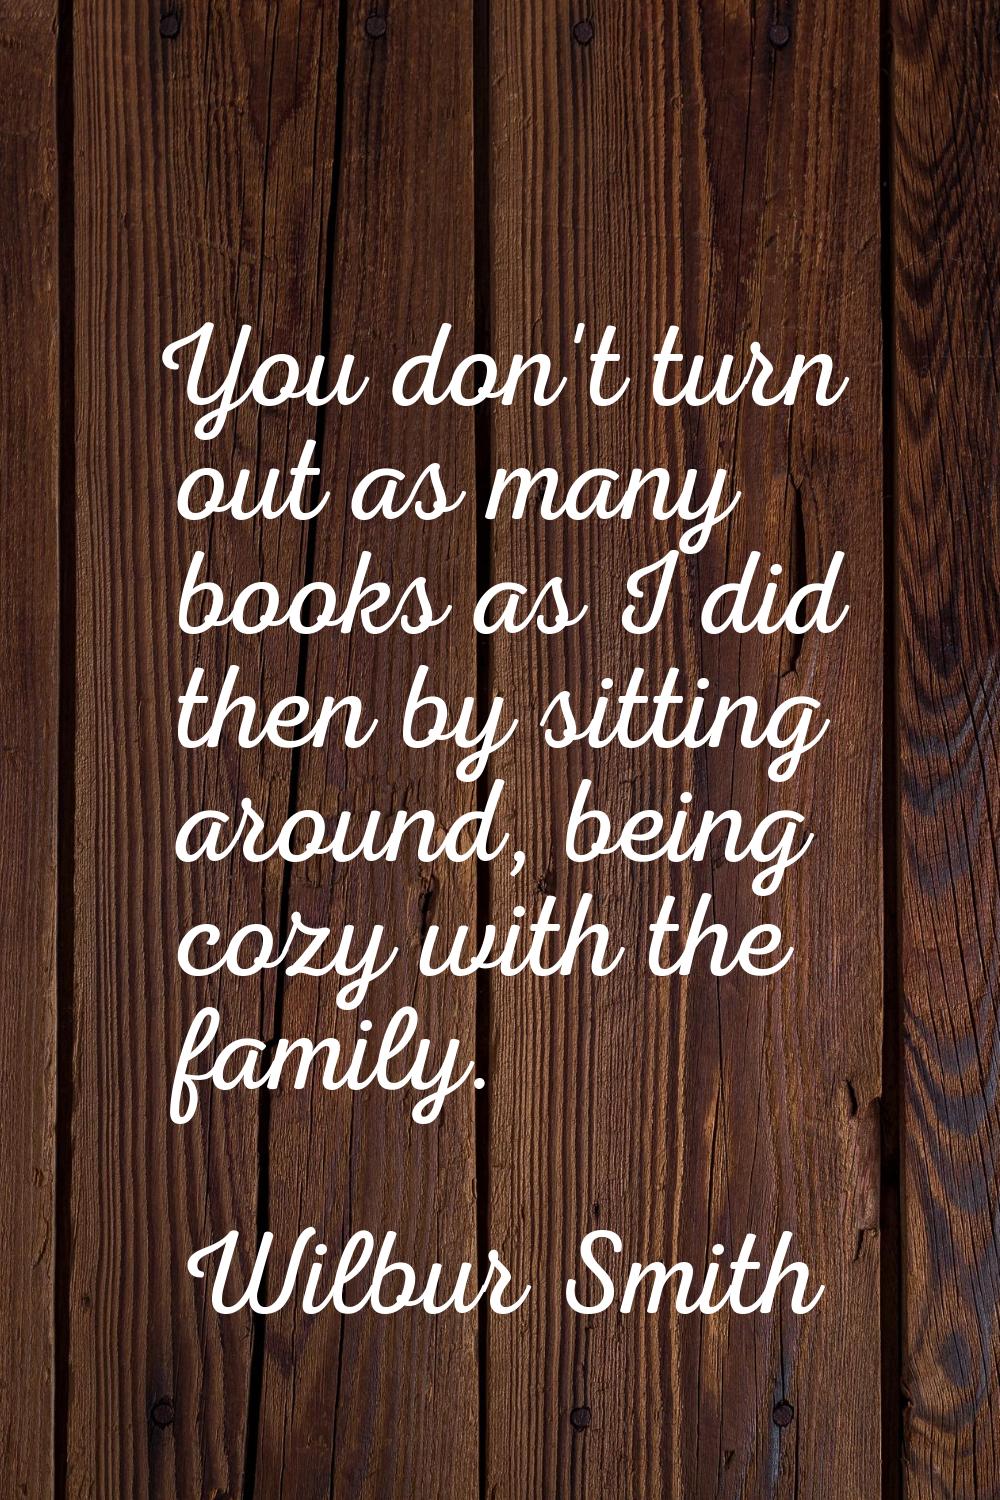 You don't turn out as many books as I did then by sitting around, being cozy with the family.